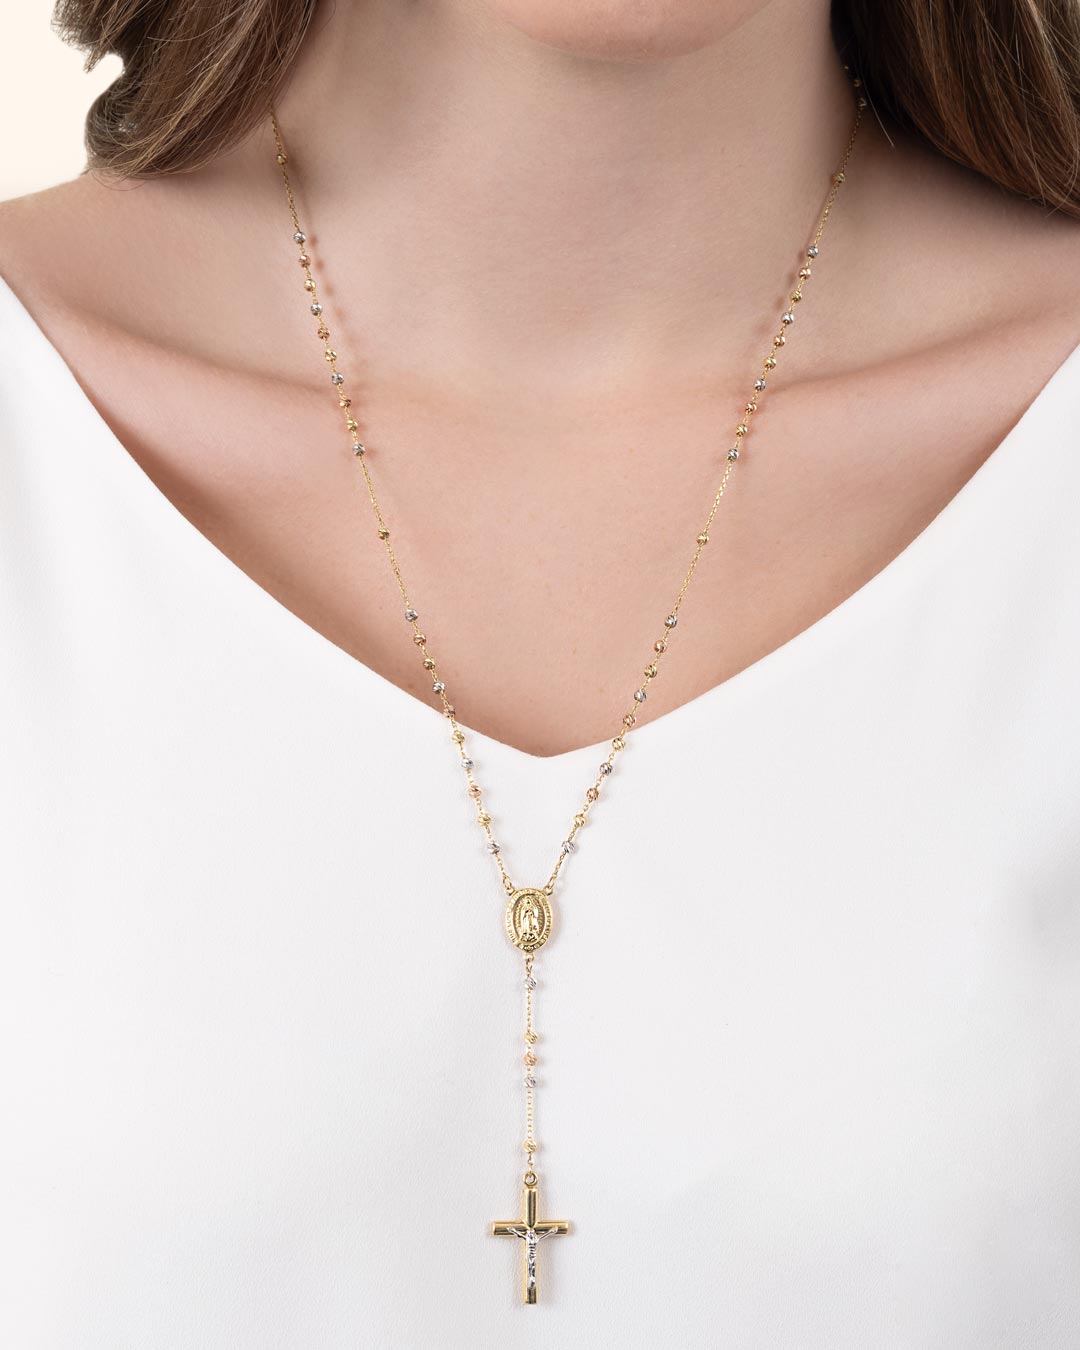 14K WHITE, YELLOW AND ROSE GOLD ROSARY